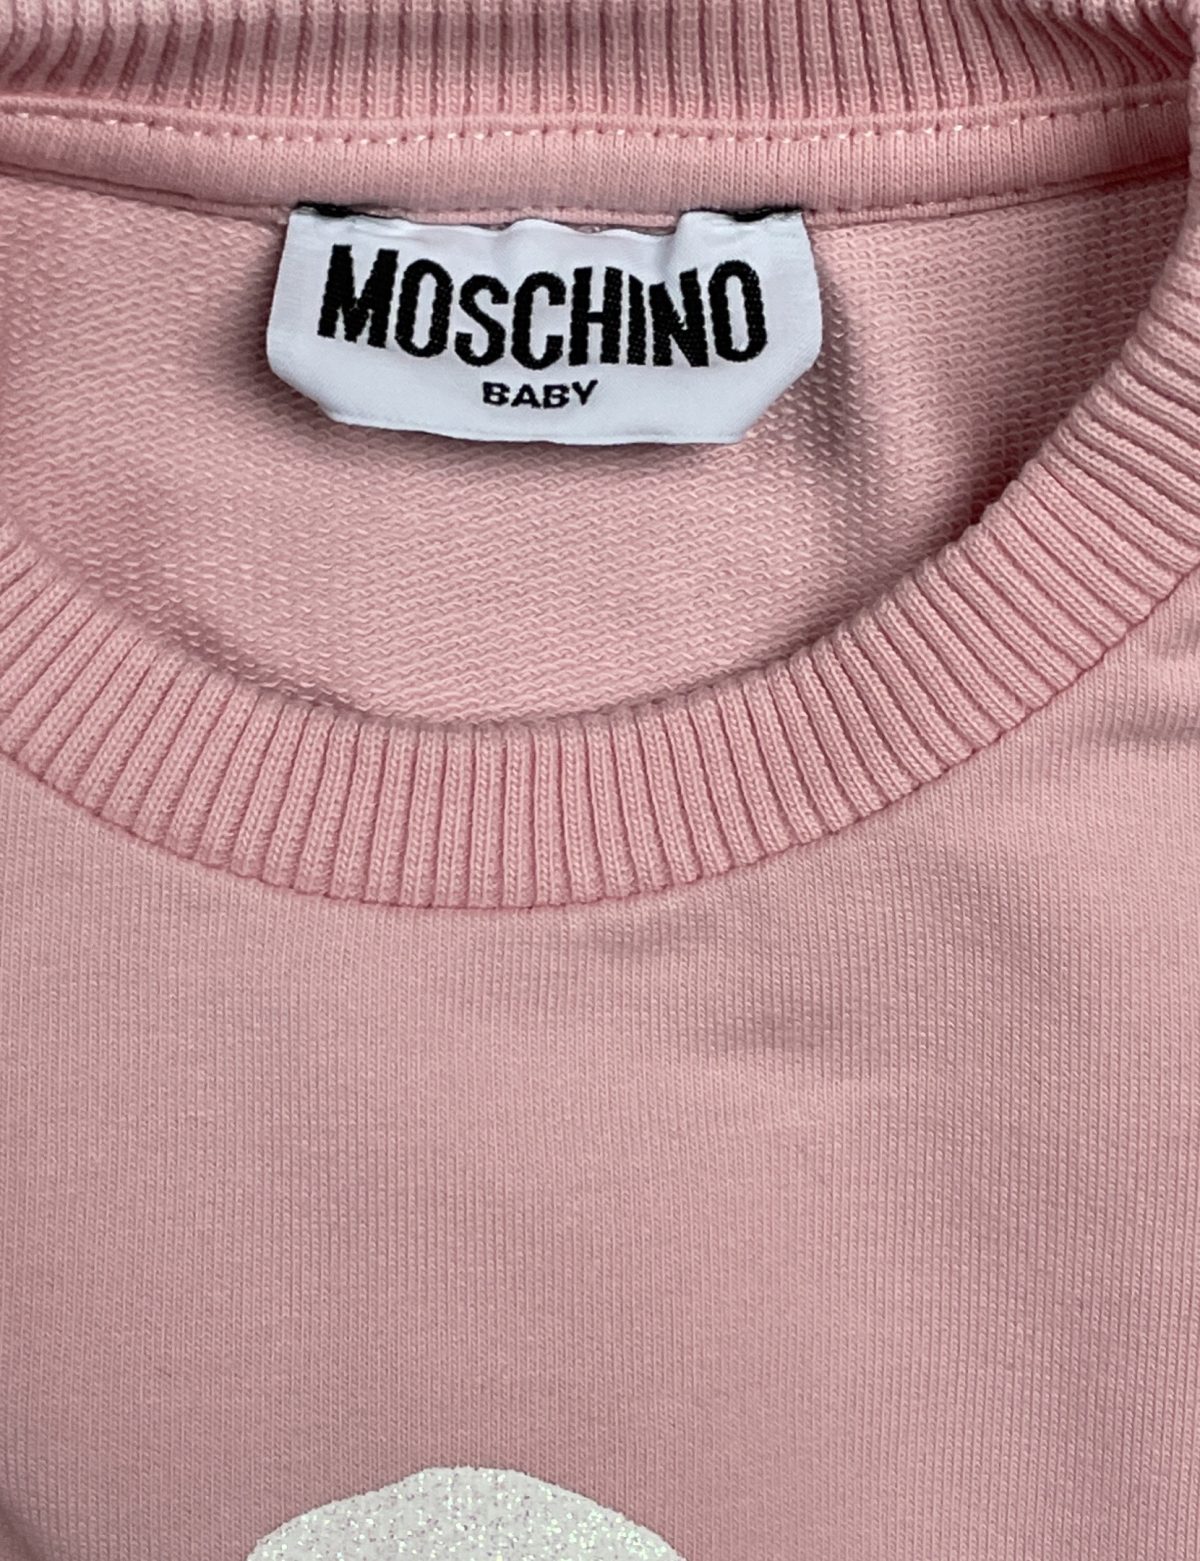 moschino-lany-rozsaszin-pulover-4